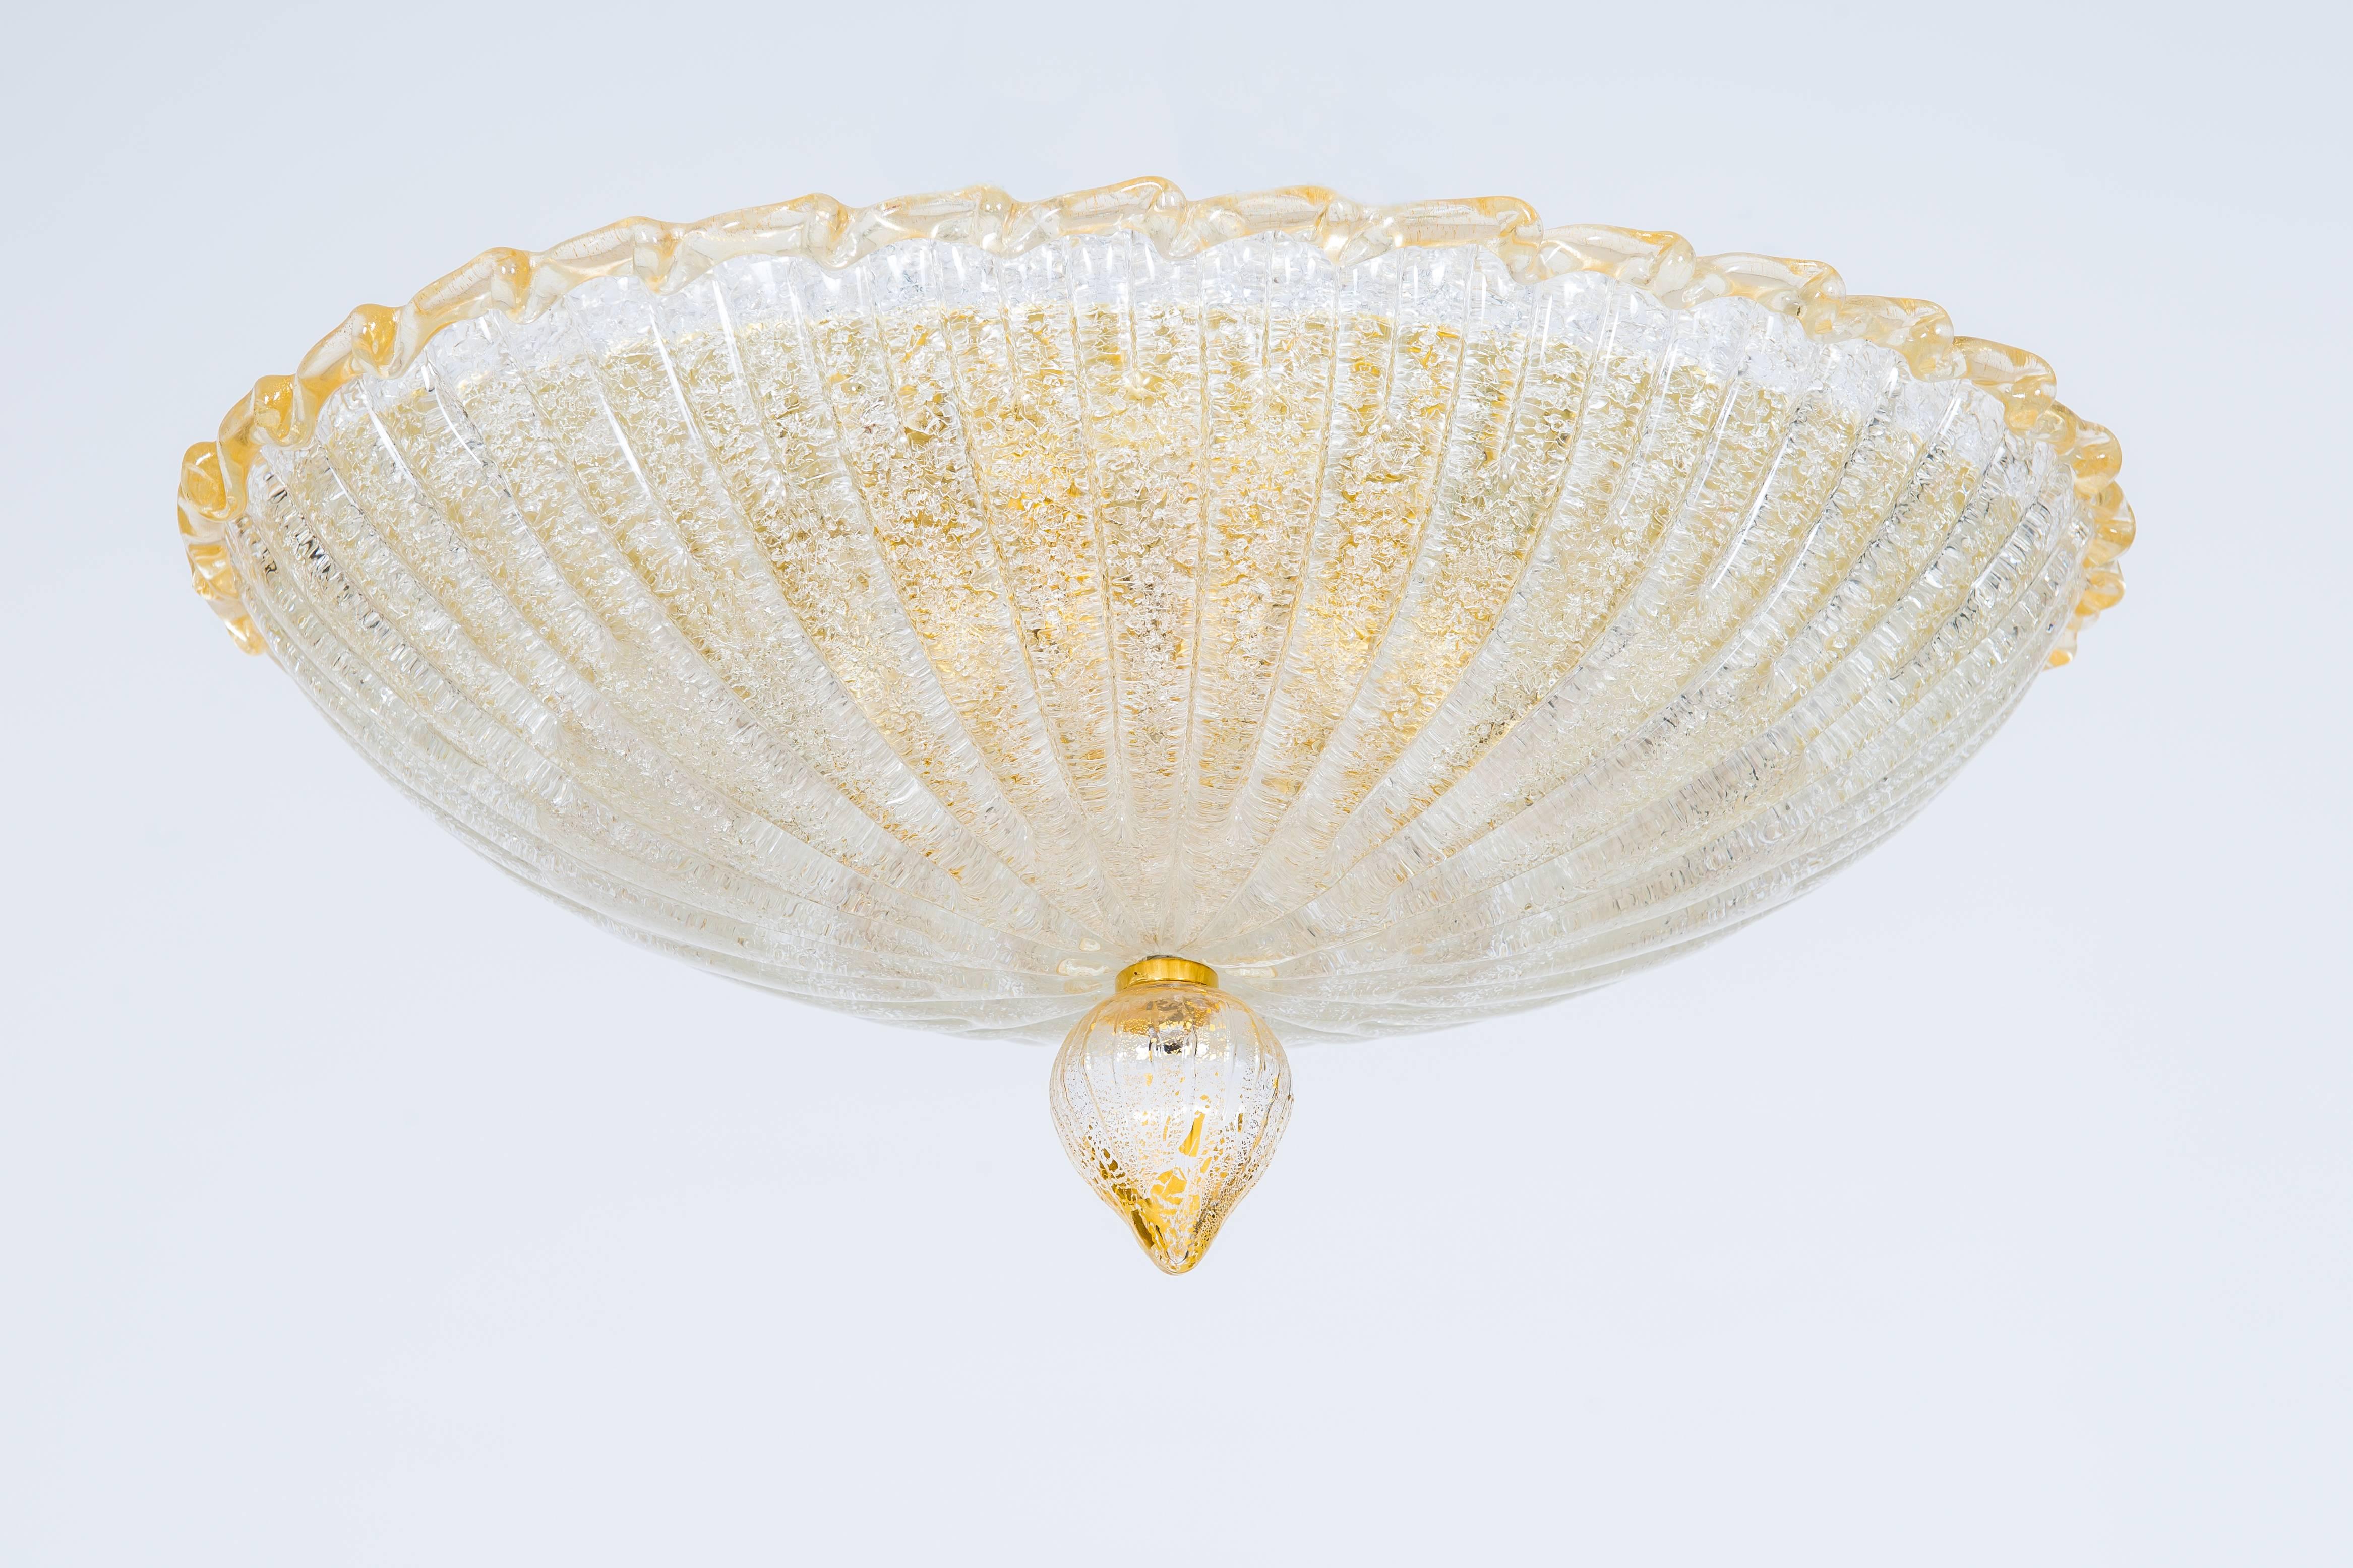 Elegant Handcrafted Italian Ceiling Lightning Murano Blown Glass gold refinished and transparent color. 
This portrait has been entirely manufactured in the Italian Murano Island, by following the antique and original tradition of the blown Murano